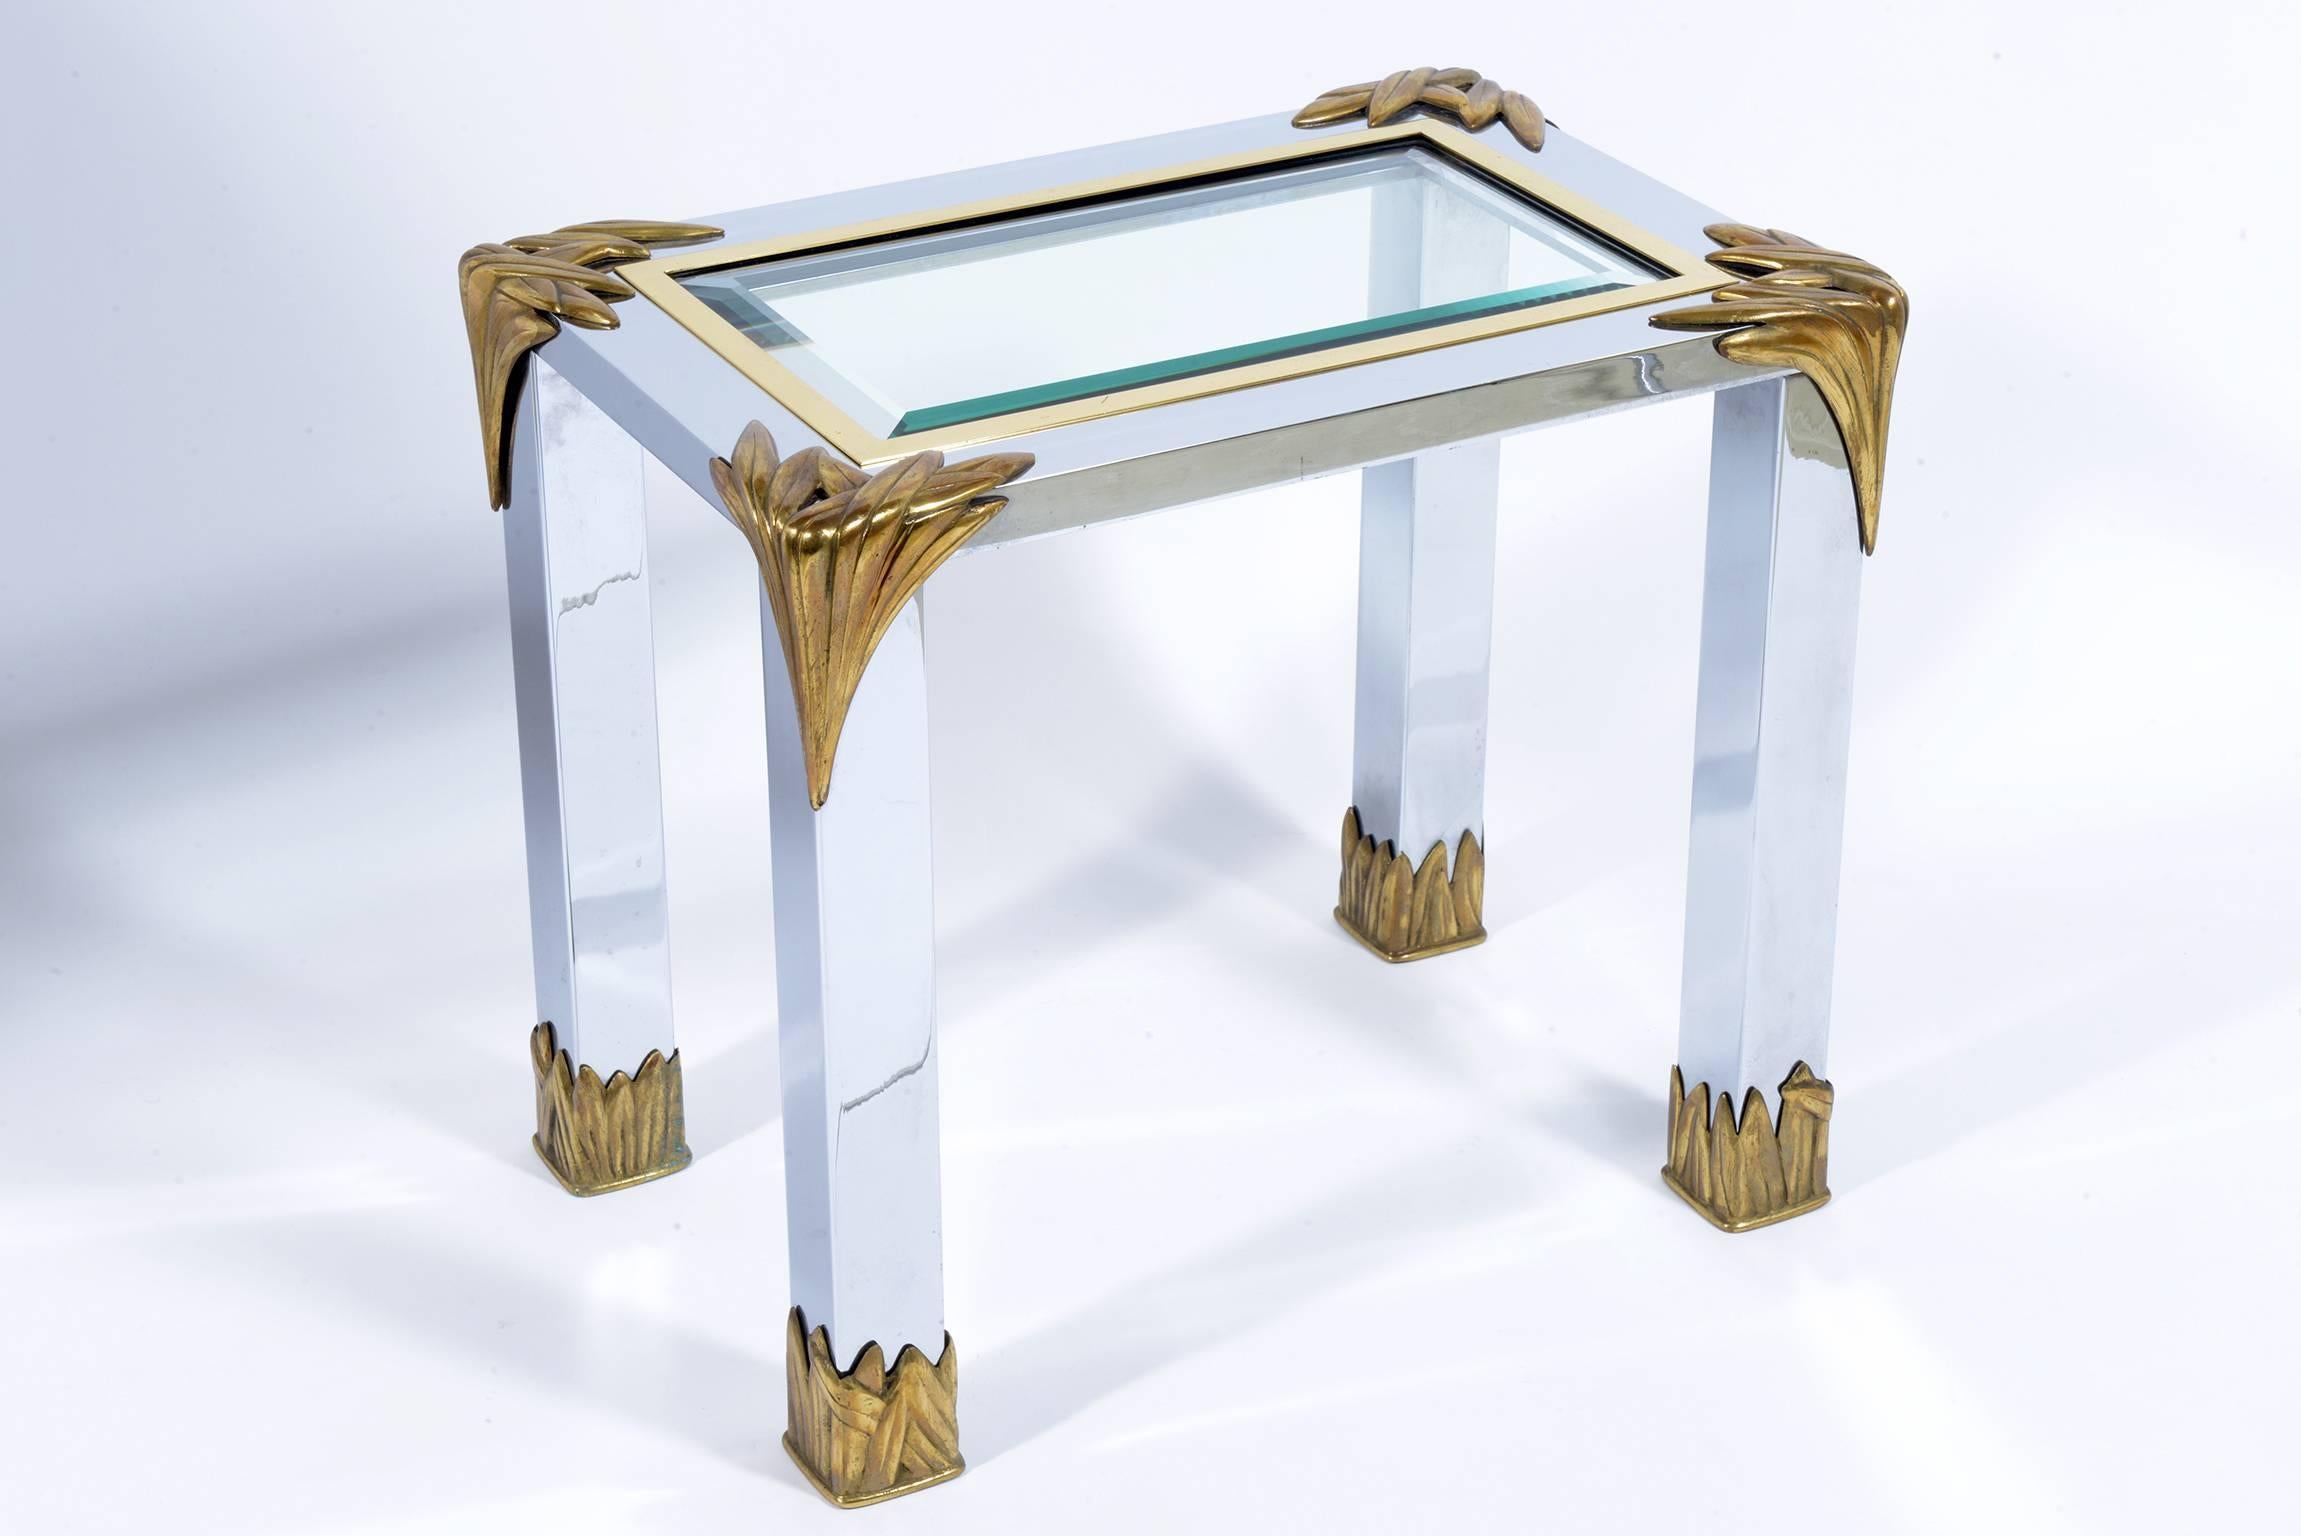 Pair of steel structure side table with vegetable cut brass details in the corner and feet , thick beveled glass top.